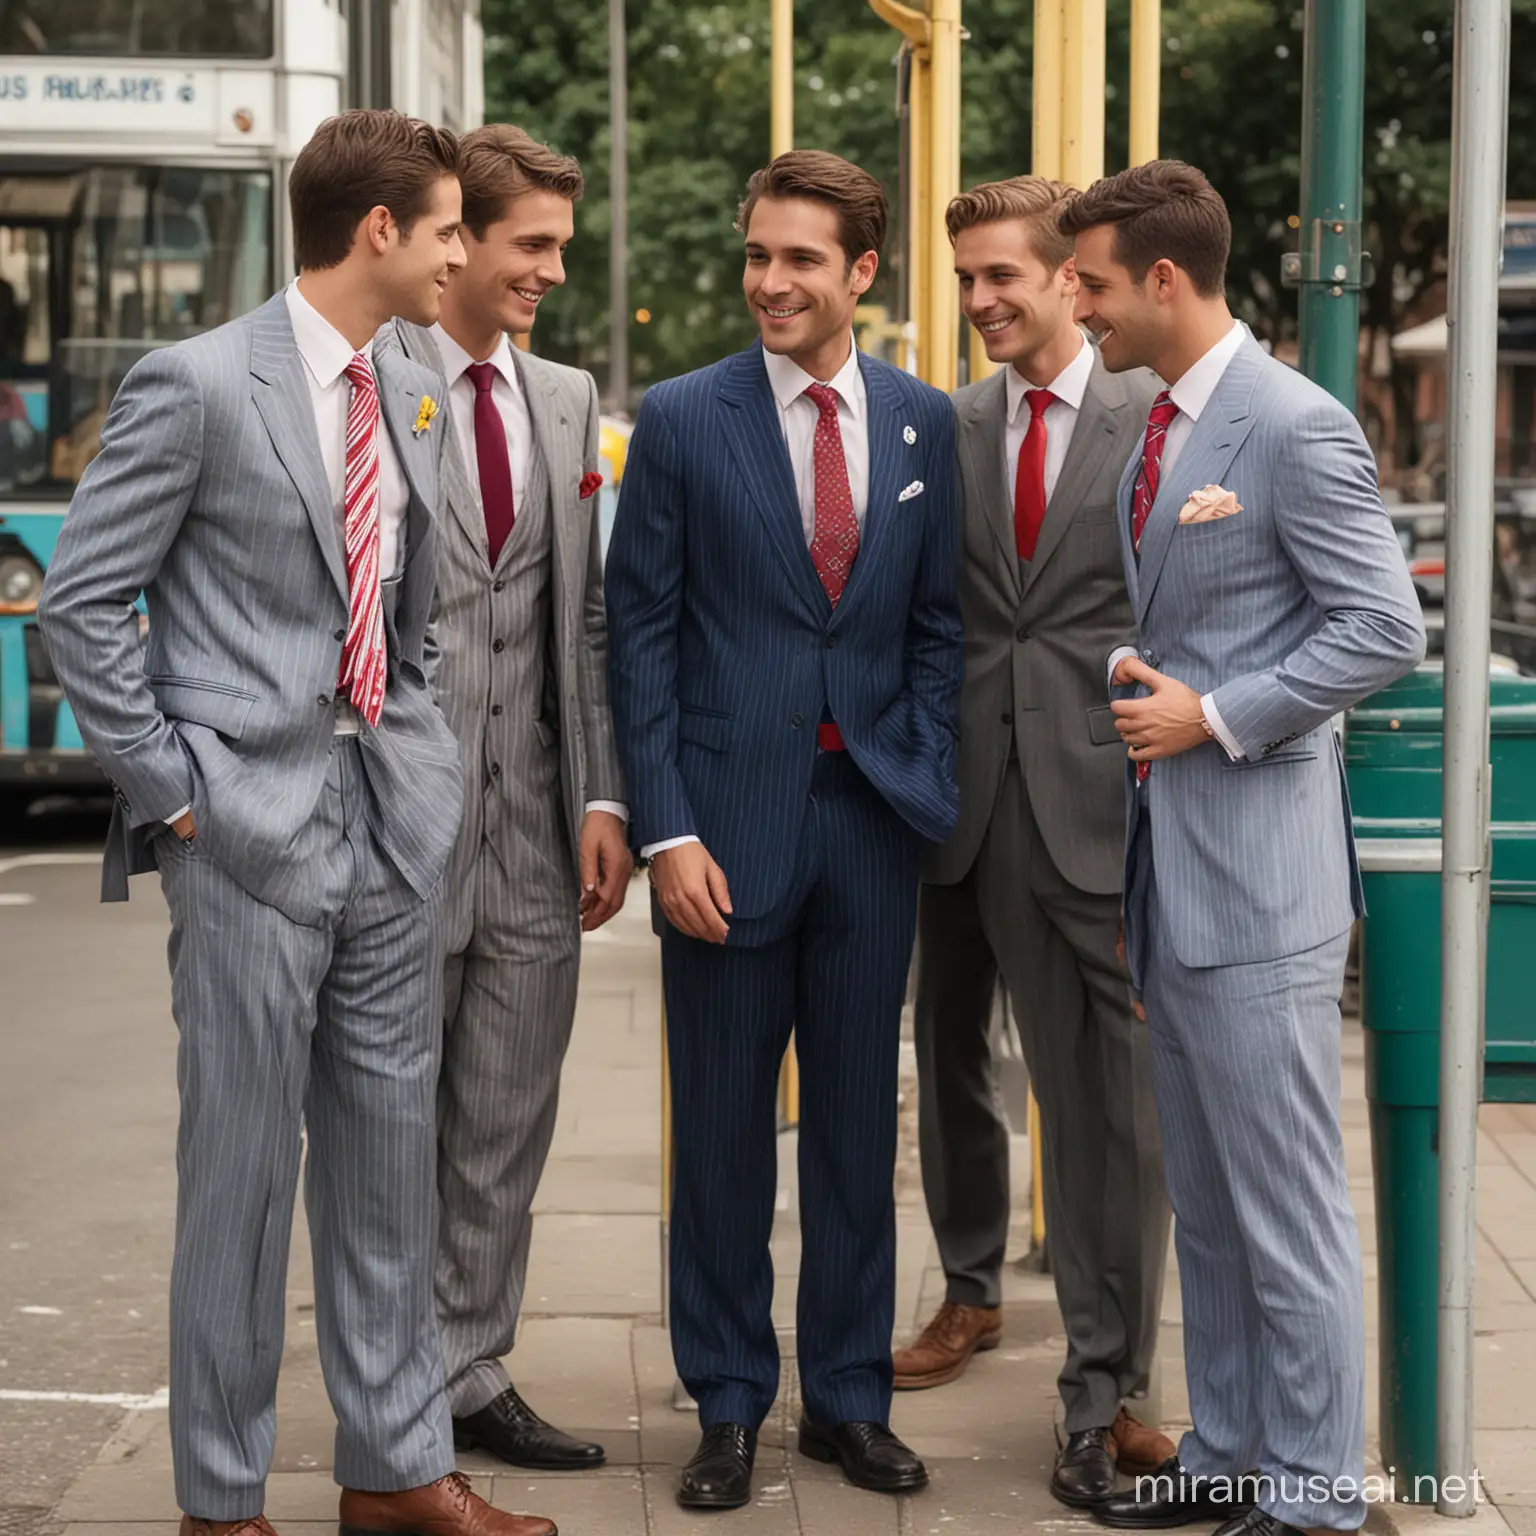 Four Men Flirting in Vibrant Pinstripe Suits at Bus Stop